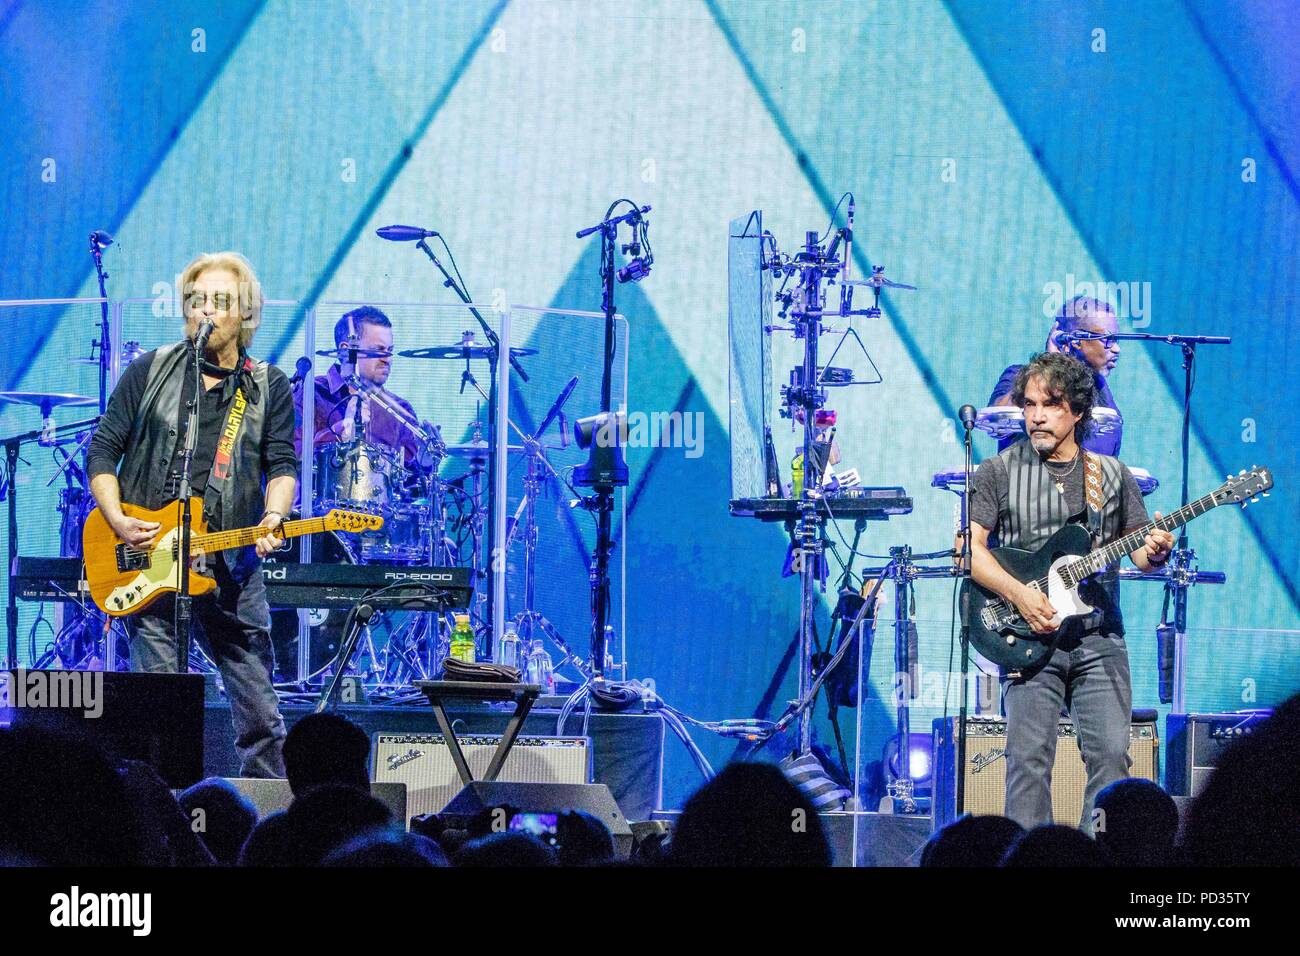 San Diego, California, USA. 4th Aug, 2018. DARYL HALL and JOHN OATES at Viejas Arena in San Diego, California on August 4, 2018 Credit: Marissa Carter/ZUMA Wire/Alamy Live News Stock Photo